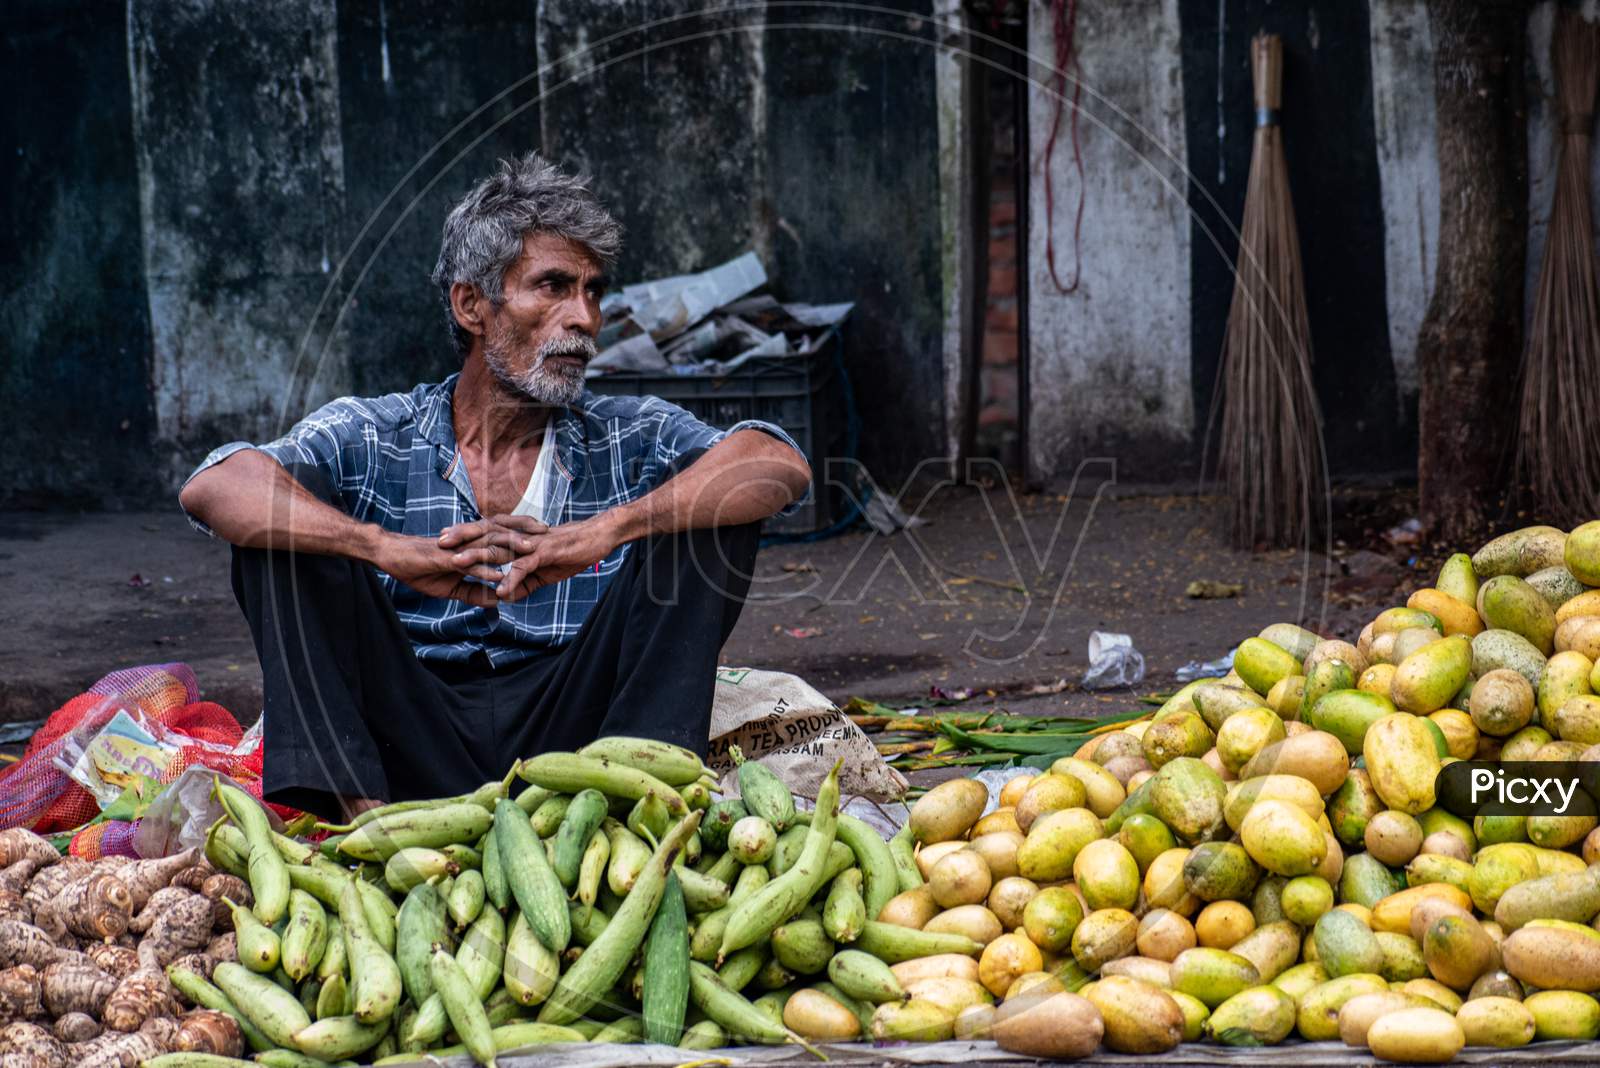 An unidentified vendor selling vegetables